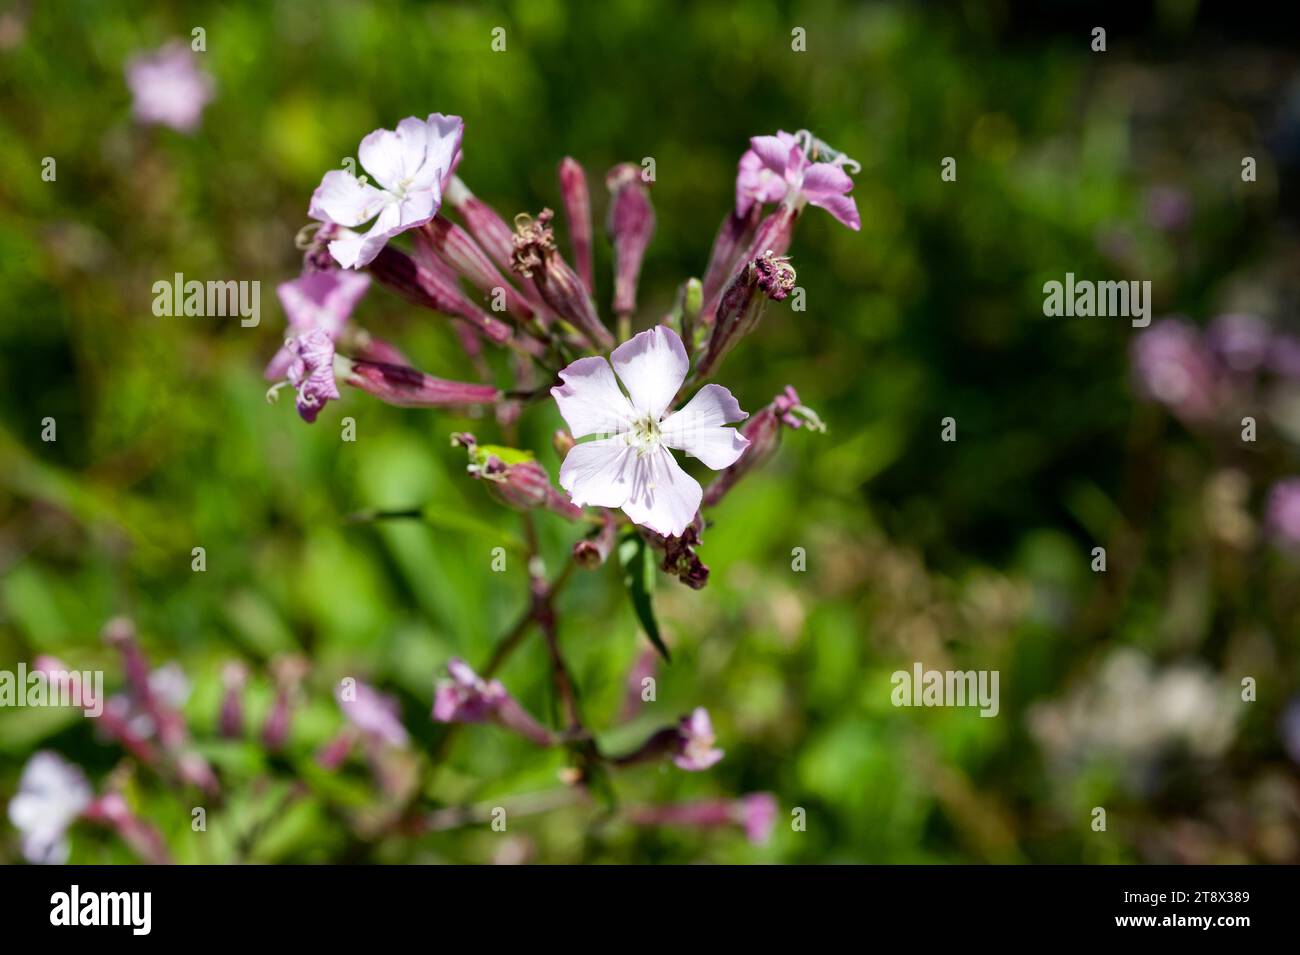 Ifac campion or Ifac catchfly (Silene hifacensis) is a endemic and endangered species native to Alicante mountains (Montgó) and Ibiza Island. Stock Photo